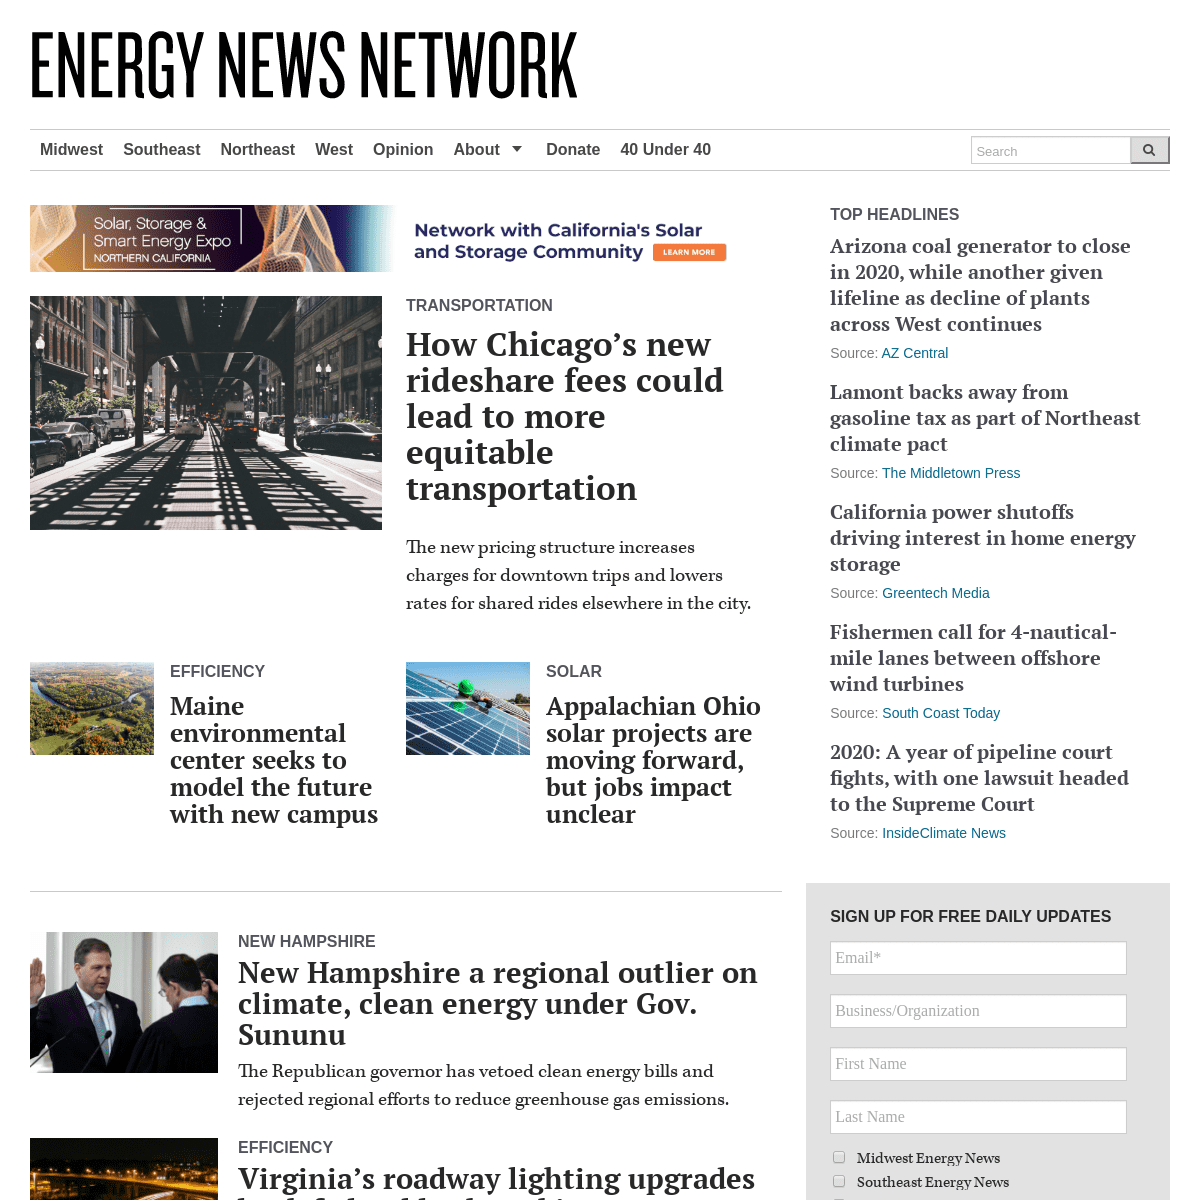 A complete backup of energynews.us